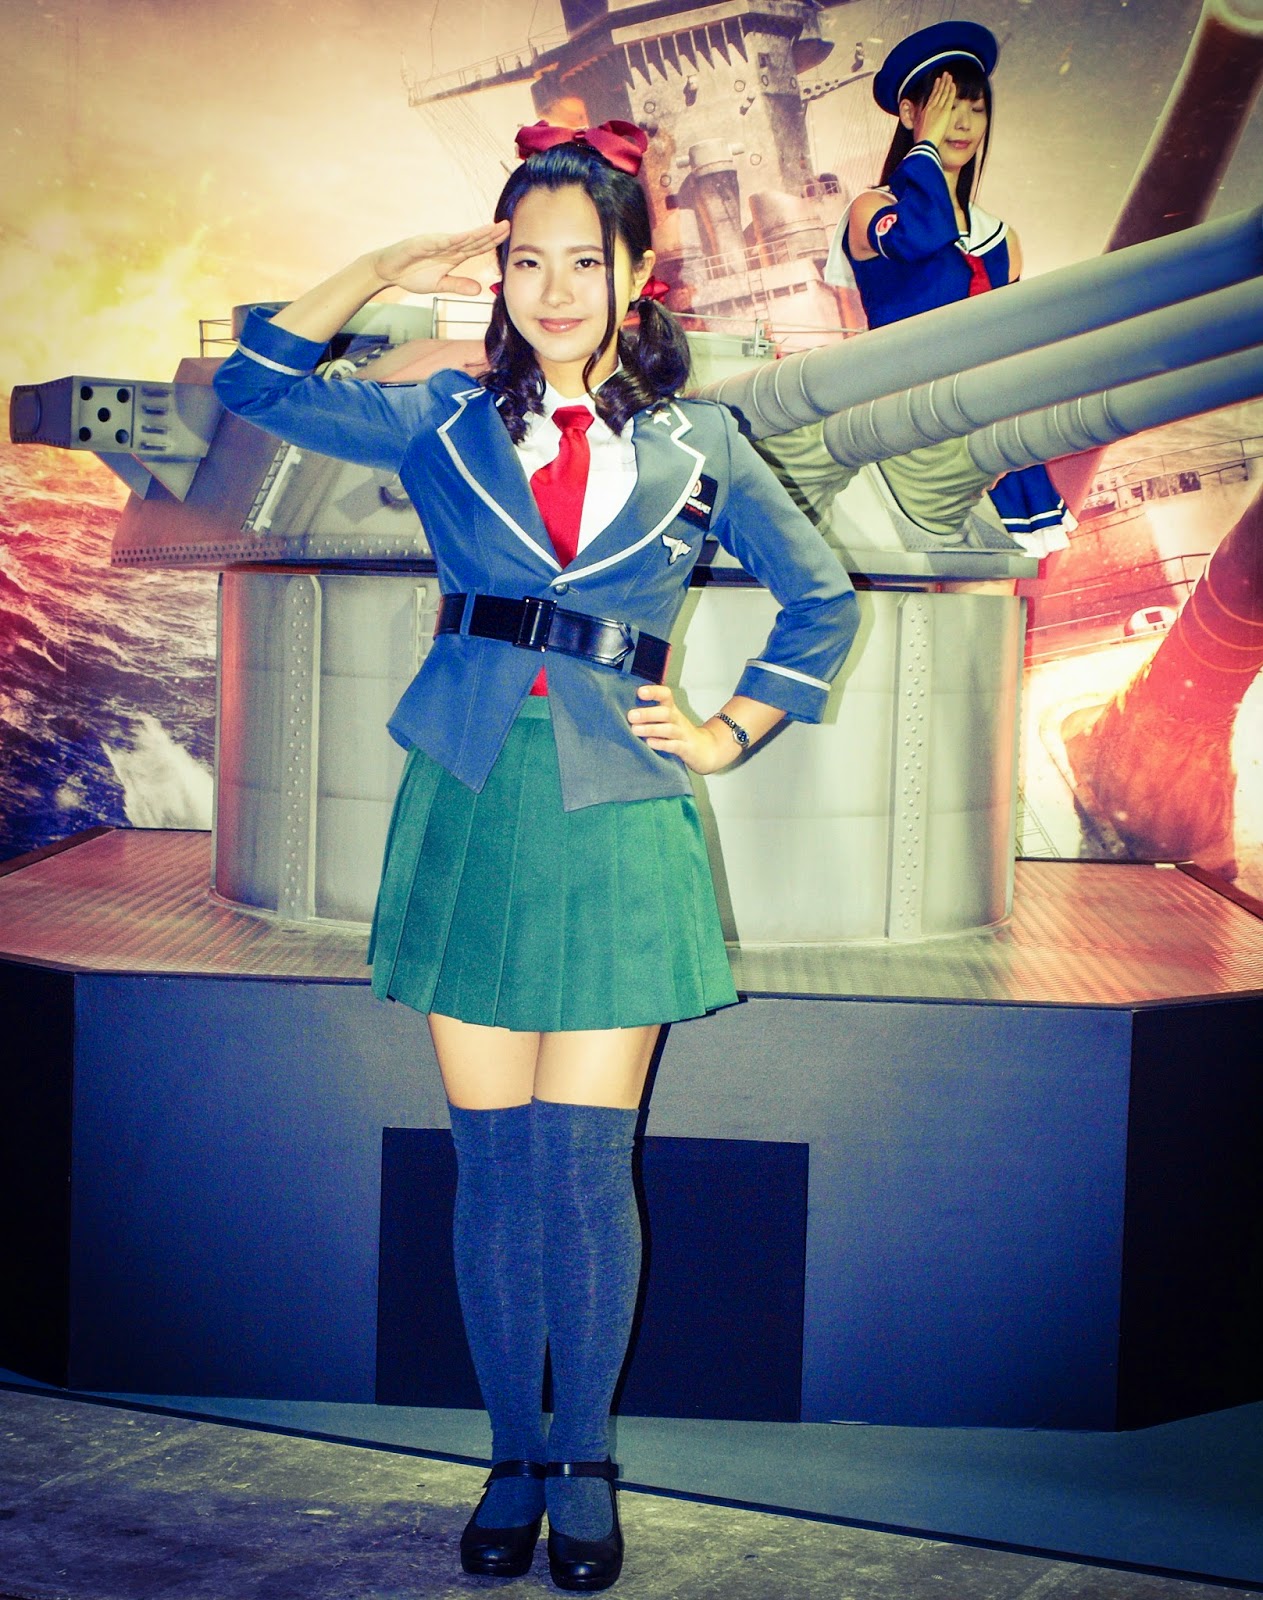 World of Tanks booth girl